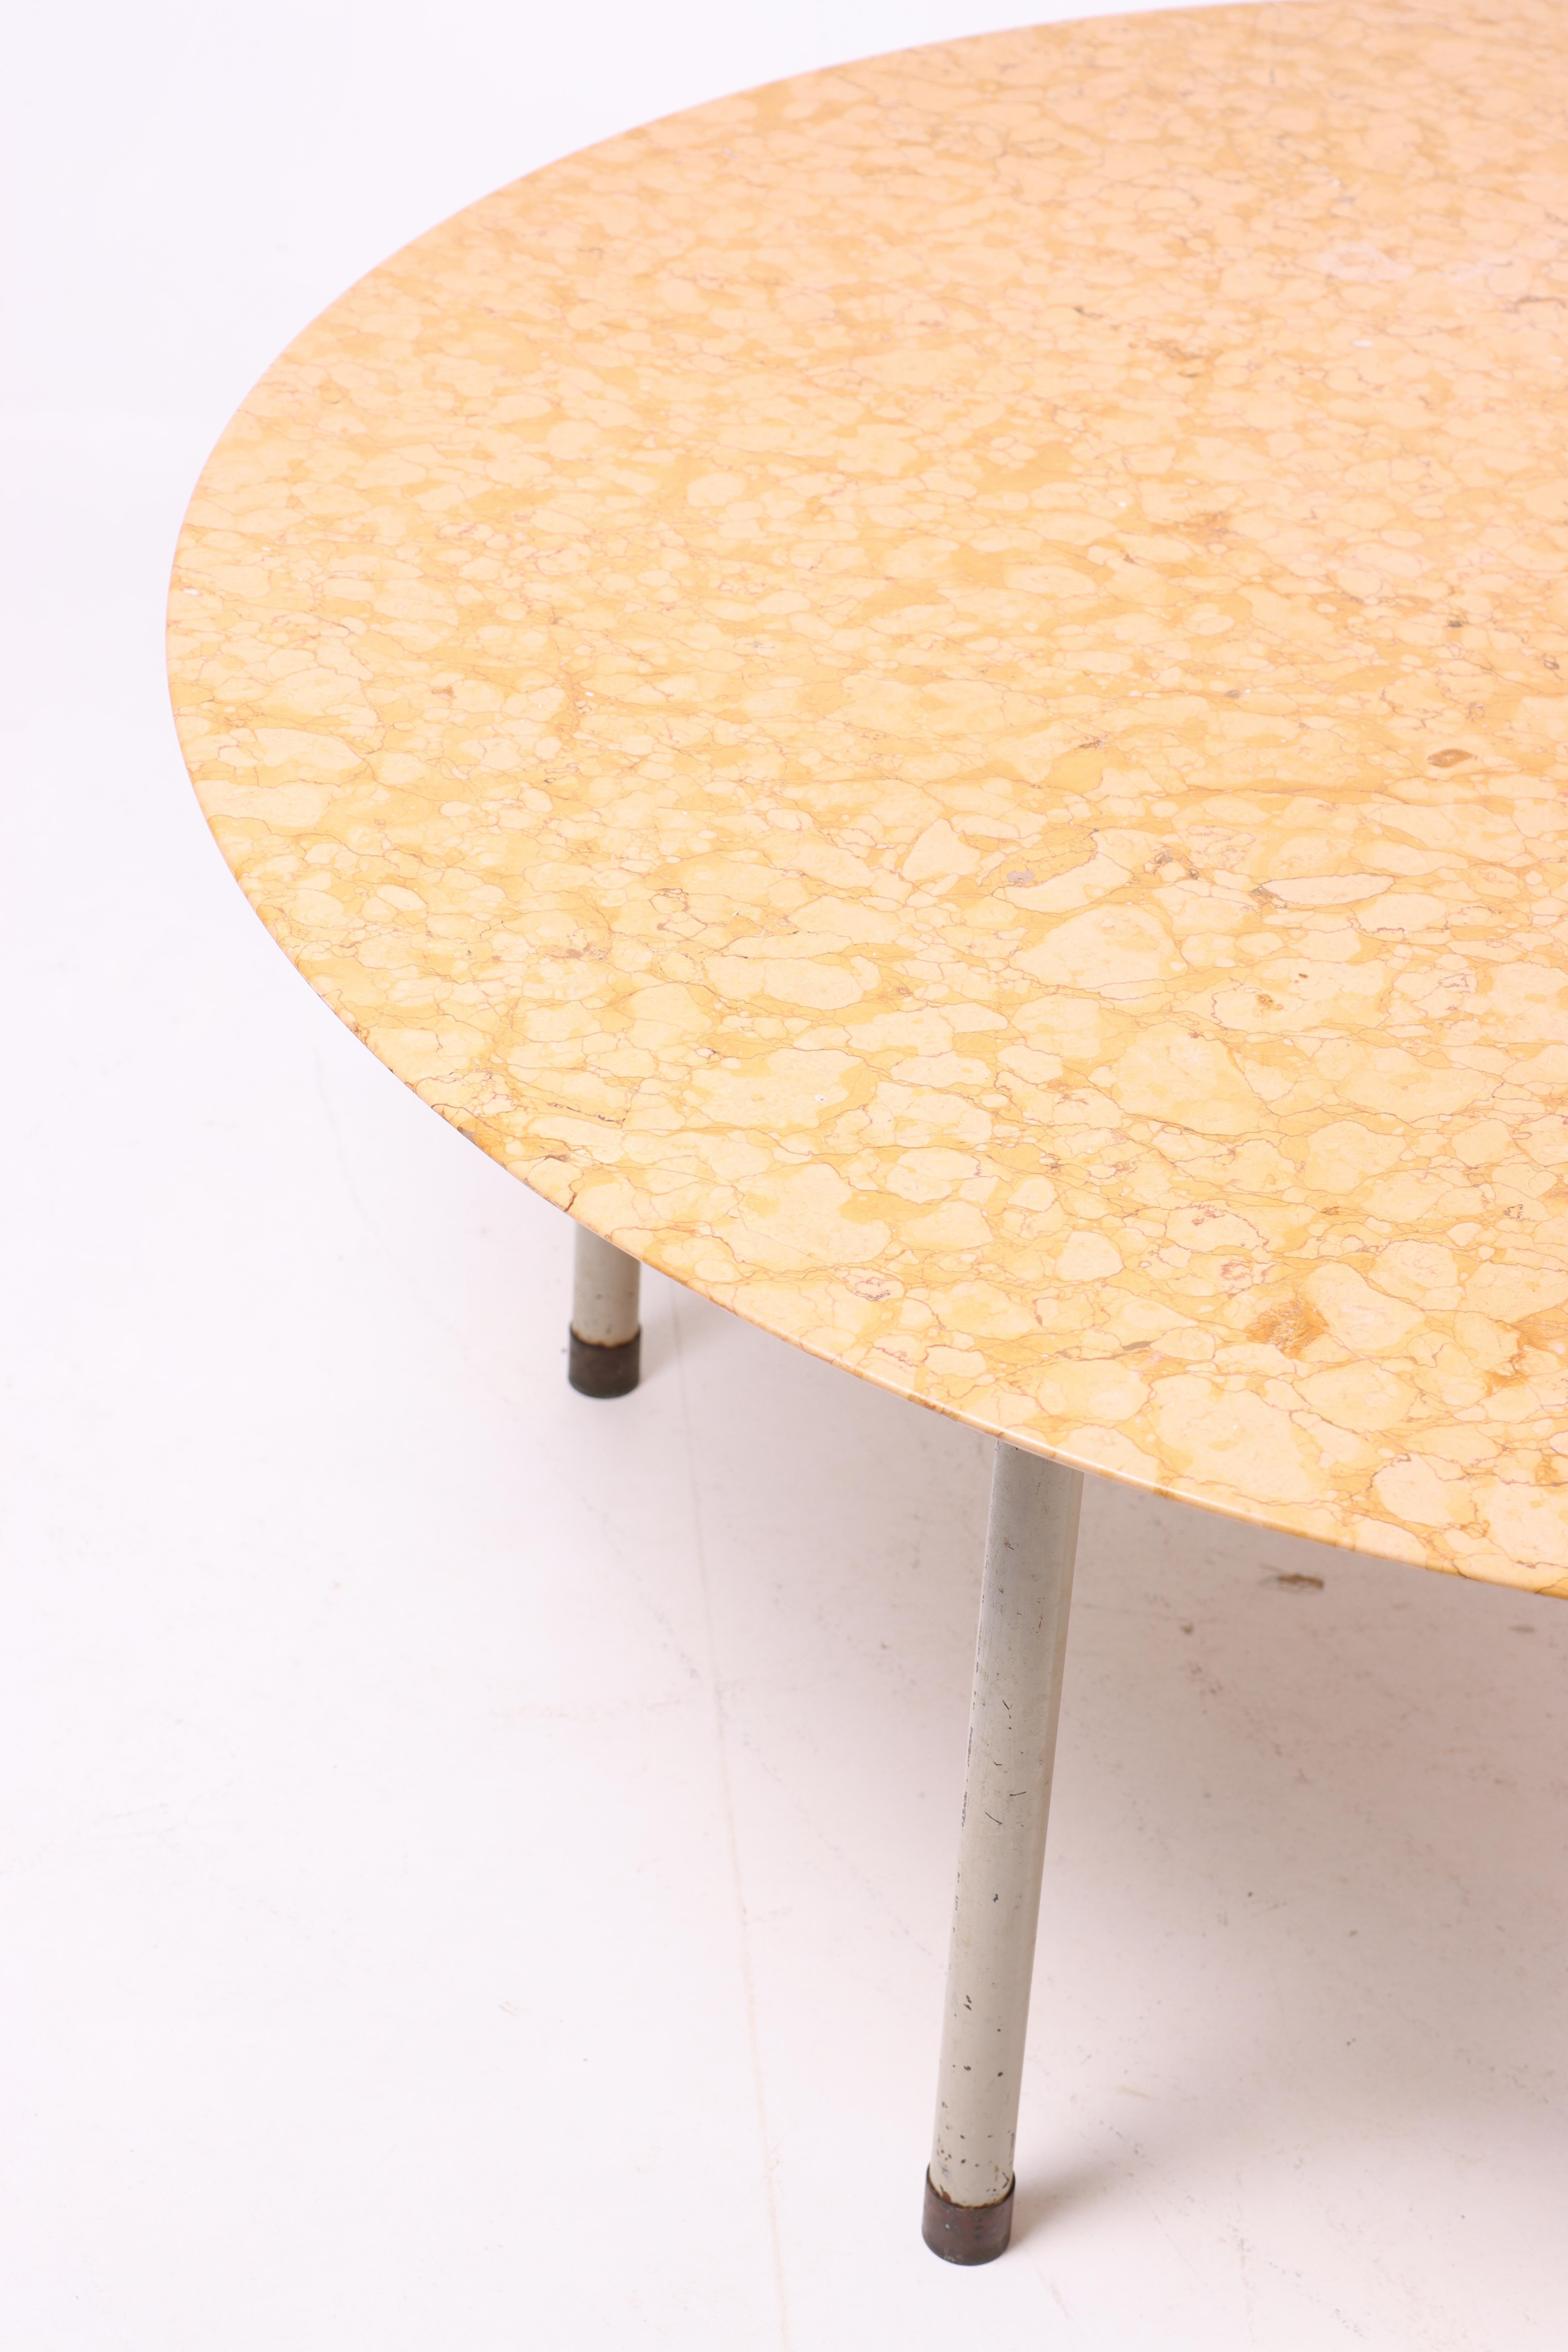 Scandinavian Modern Midcentury Circular Low Table with Red Verona Marble Top by Acton Bjørn. For Sale